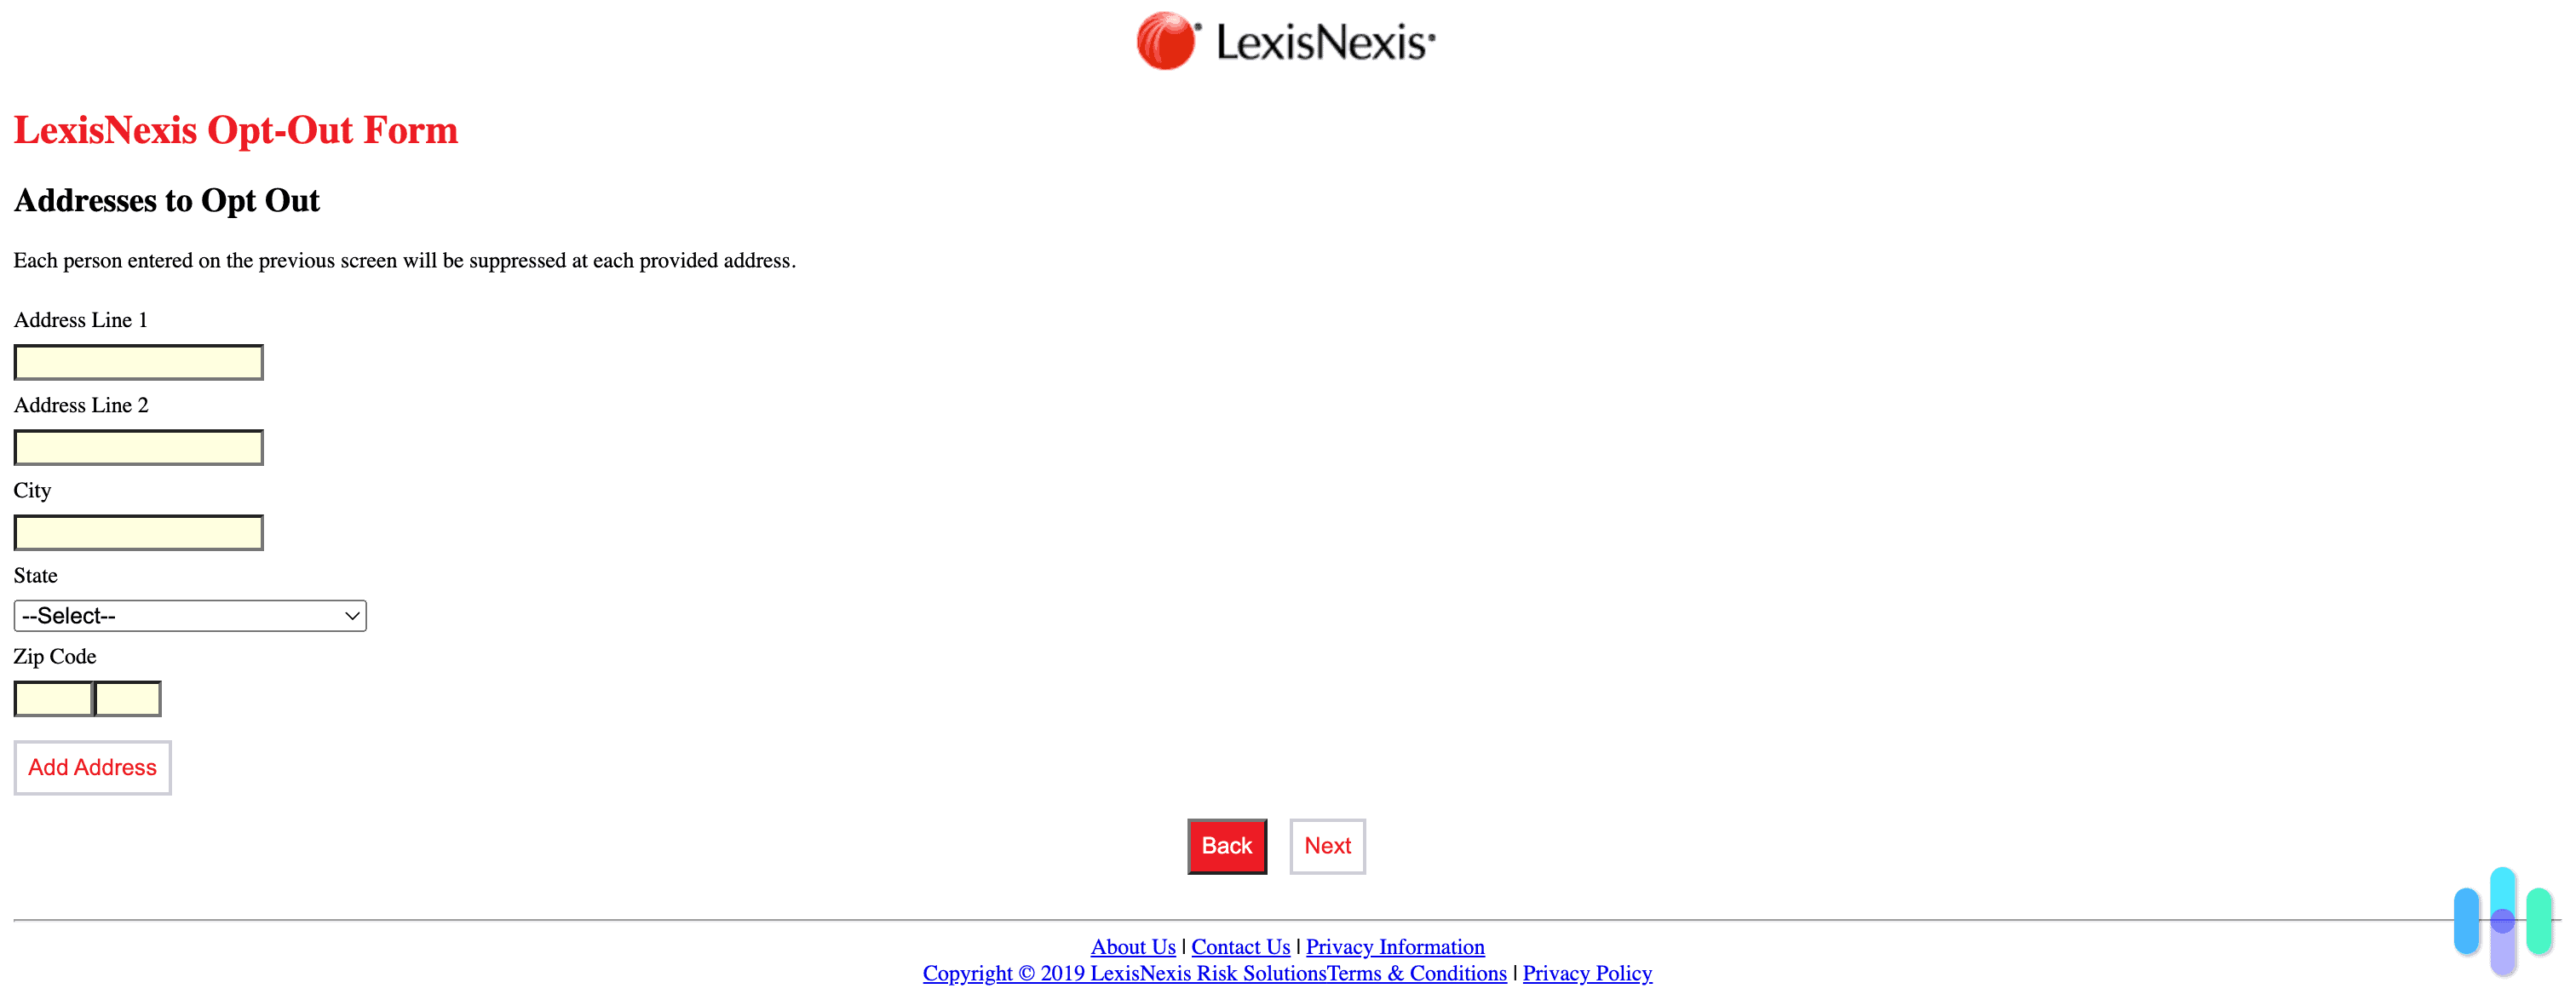 The LexisNexis opt out form addresses